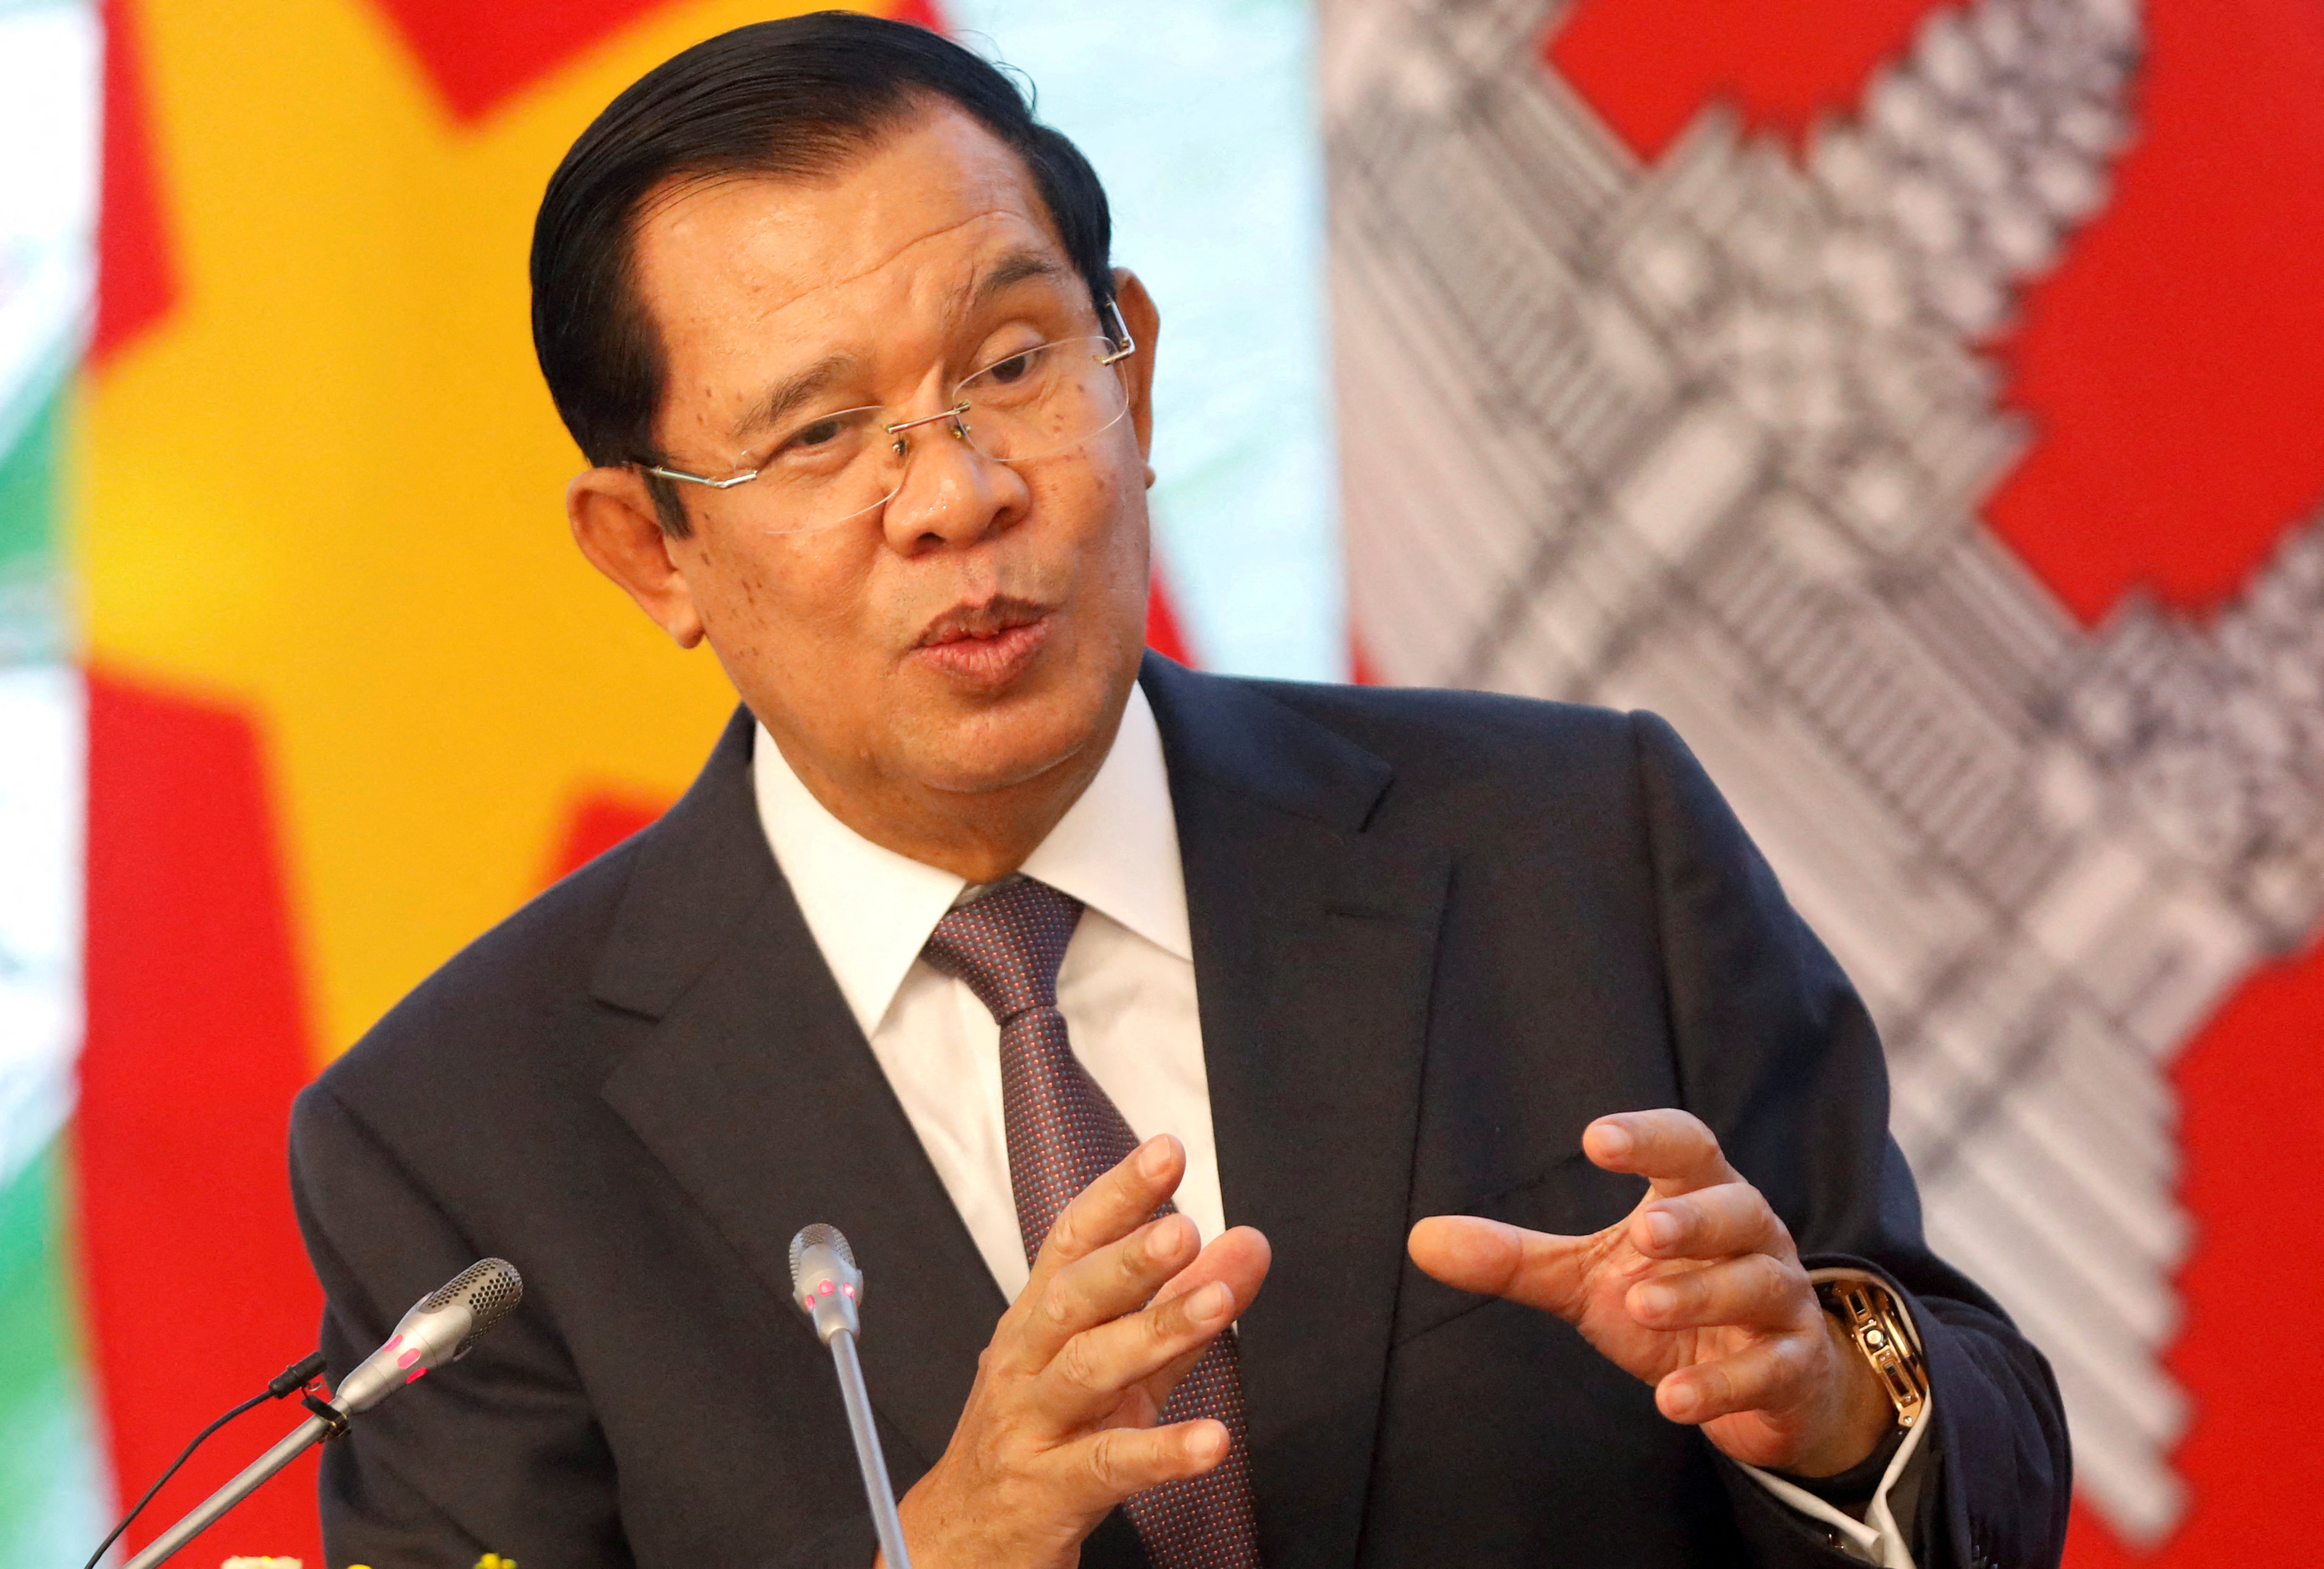 Cambodia's Prime Minister Hun Sen speaks with media during a news conference at the Government Office in Hanoi